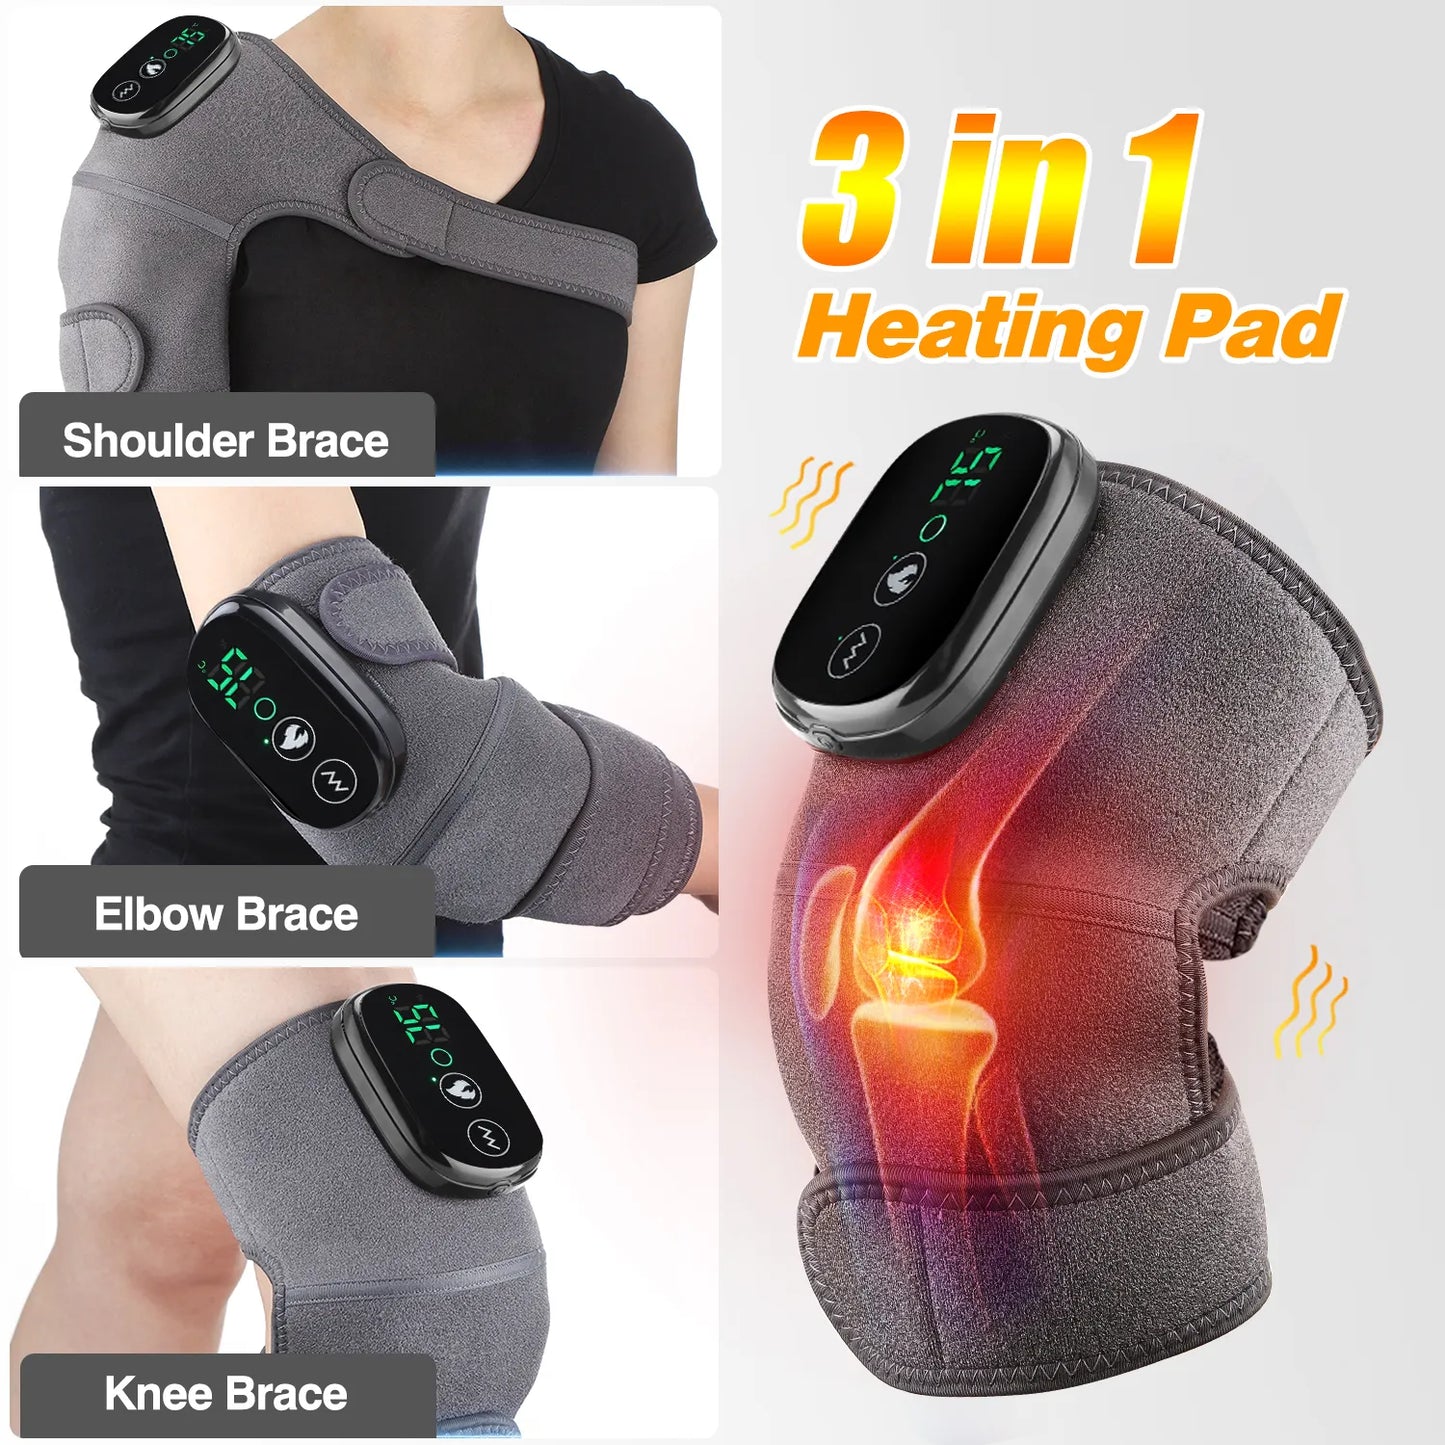 Electric Heating Knee Pad Vibration Massage Leg Joint Elbow Support Shoulder Warming Relieve Arthritis Knee Temperature Massager ShopOnlyDeal